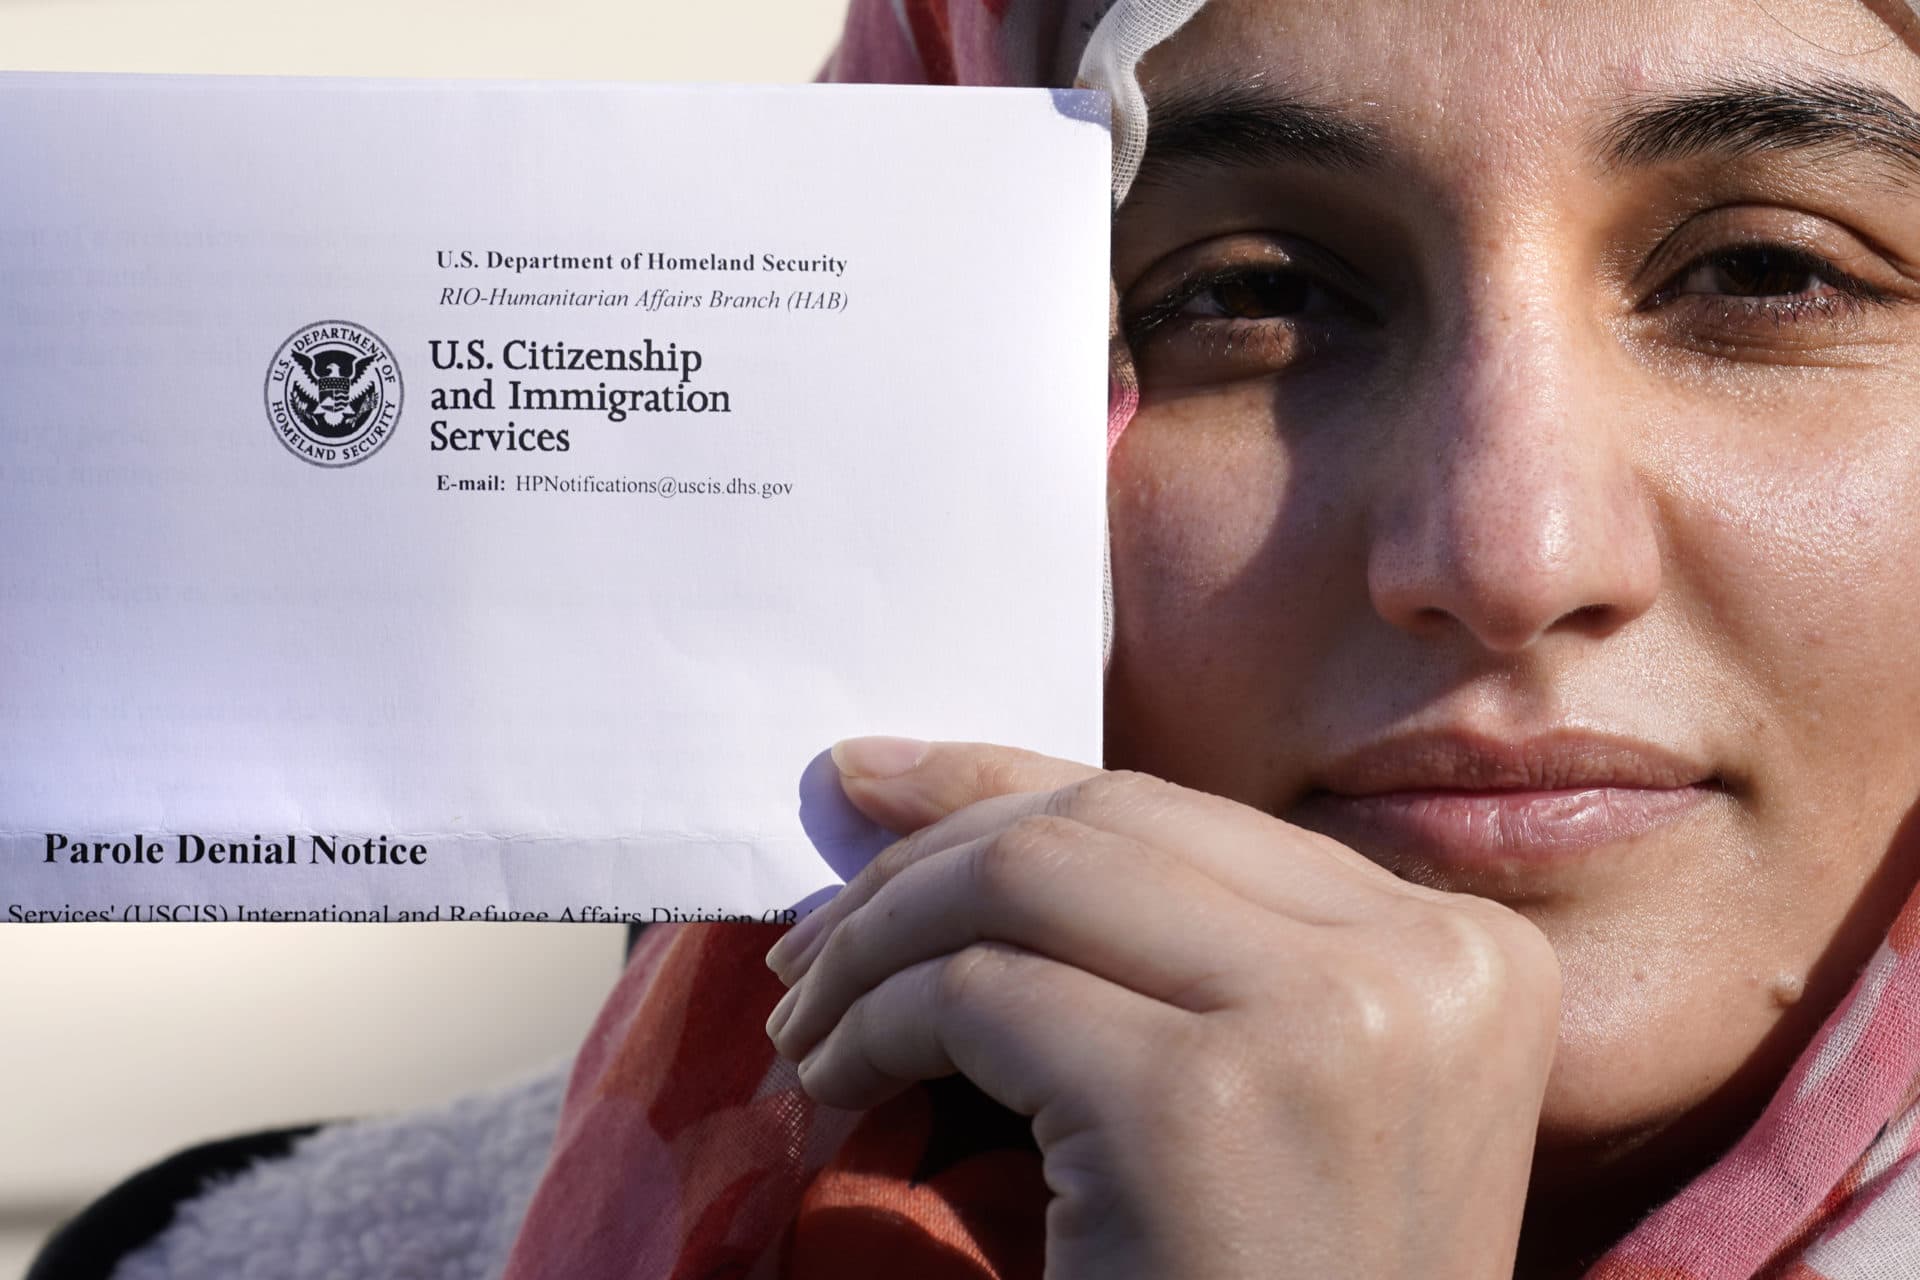 Haseena Niazi received the letter from the federal government denying her fiancé's humanitarian parole application earlier in the month. Her fiance, who she asked not to be named over concerns about his safety, had received threats from Taliban members for working on women's health issues at a hospital north of Kabul. (Charles Krupa/AP)